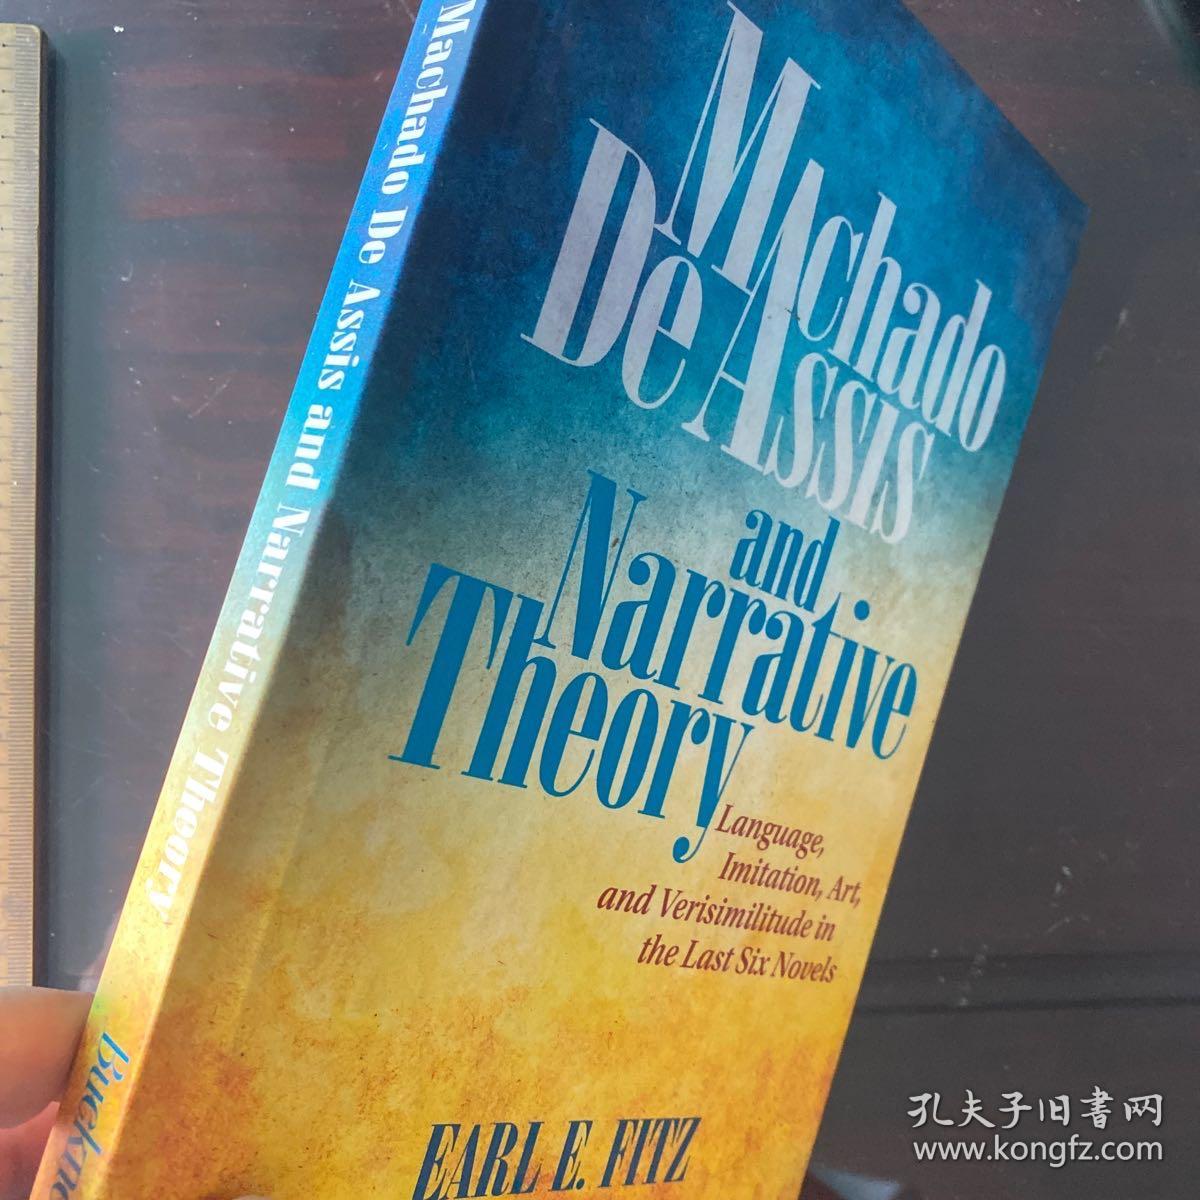 Machado deassis and narrative theory language imitation art and versimilitude in the last six novels fiction craft research design英文原版精装精装